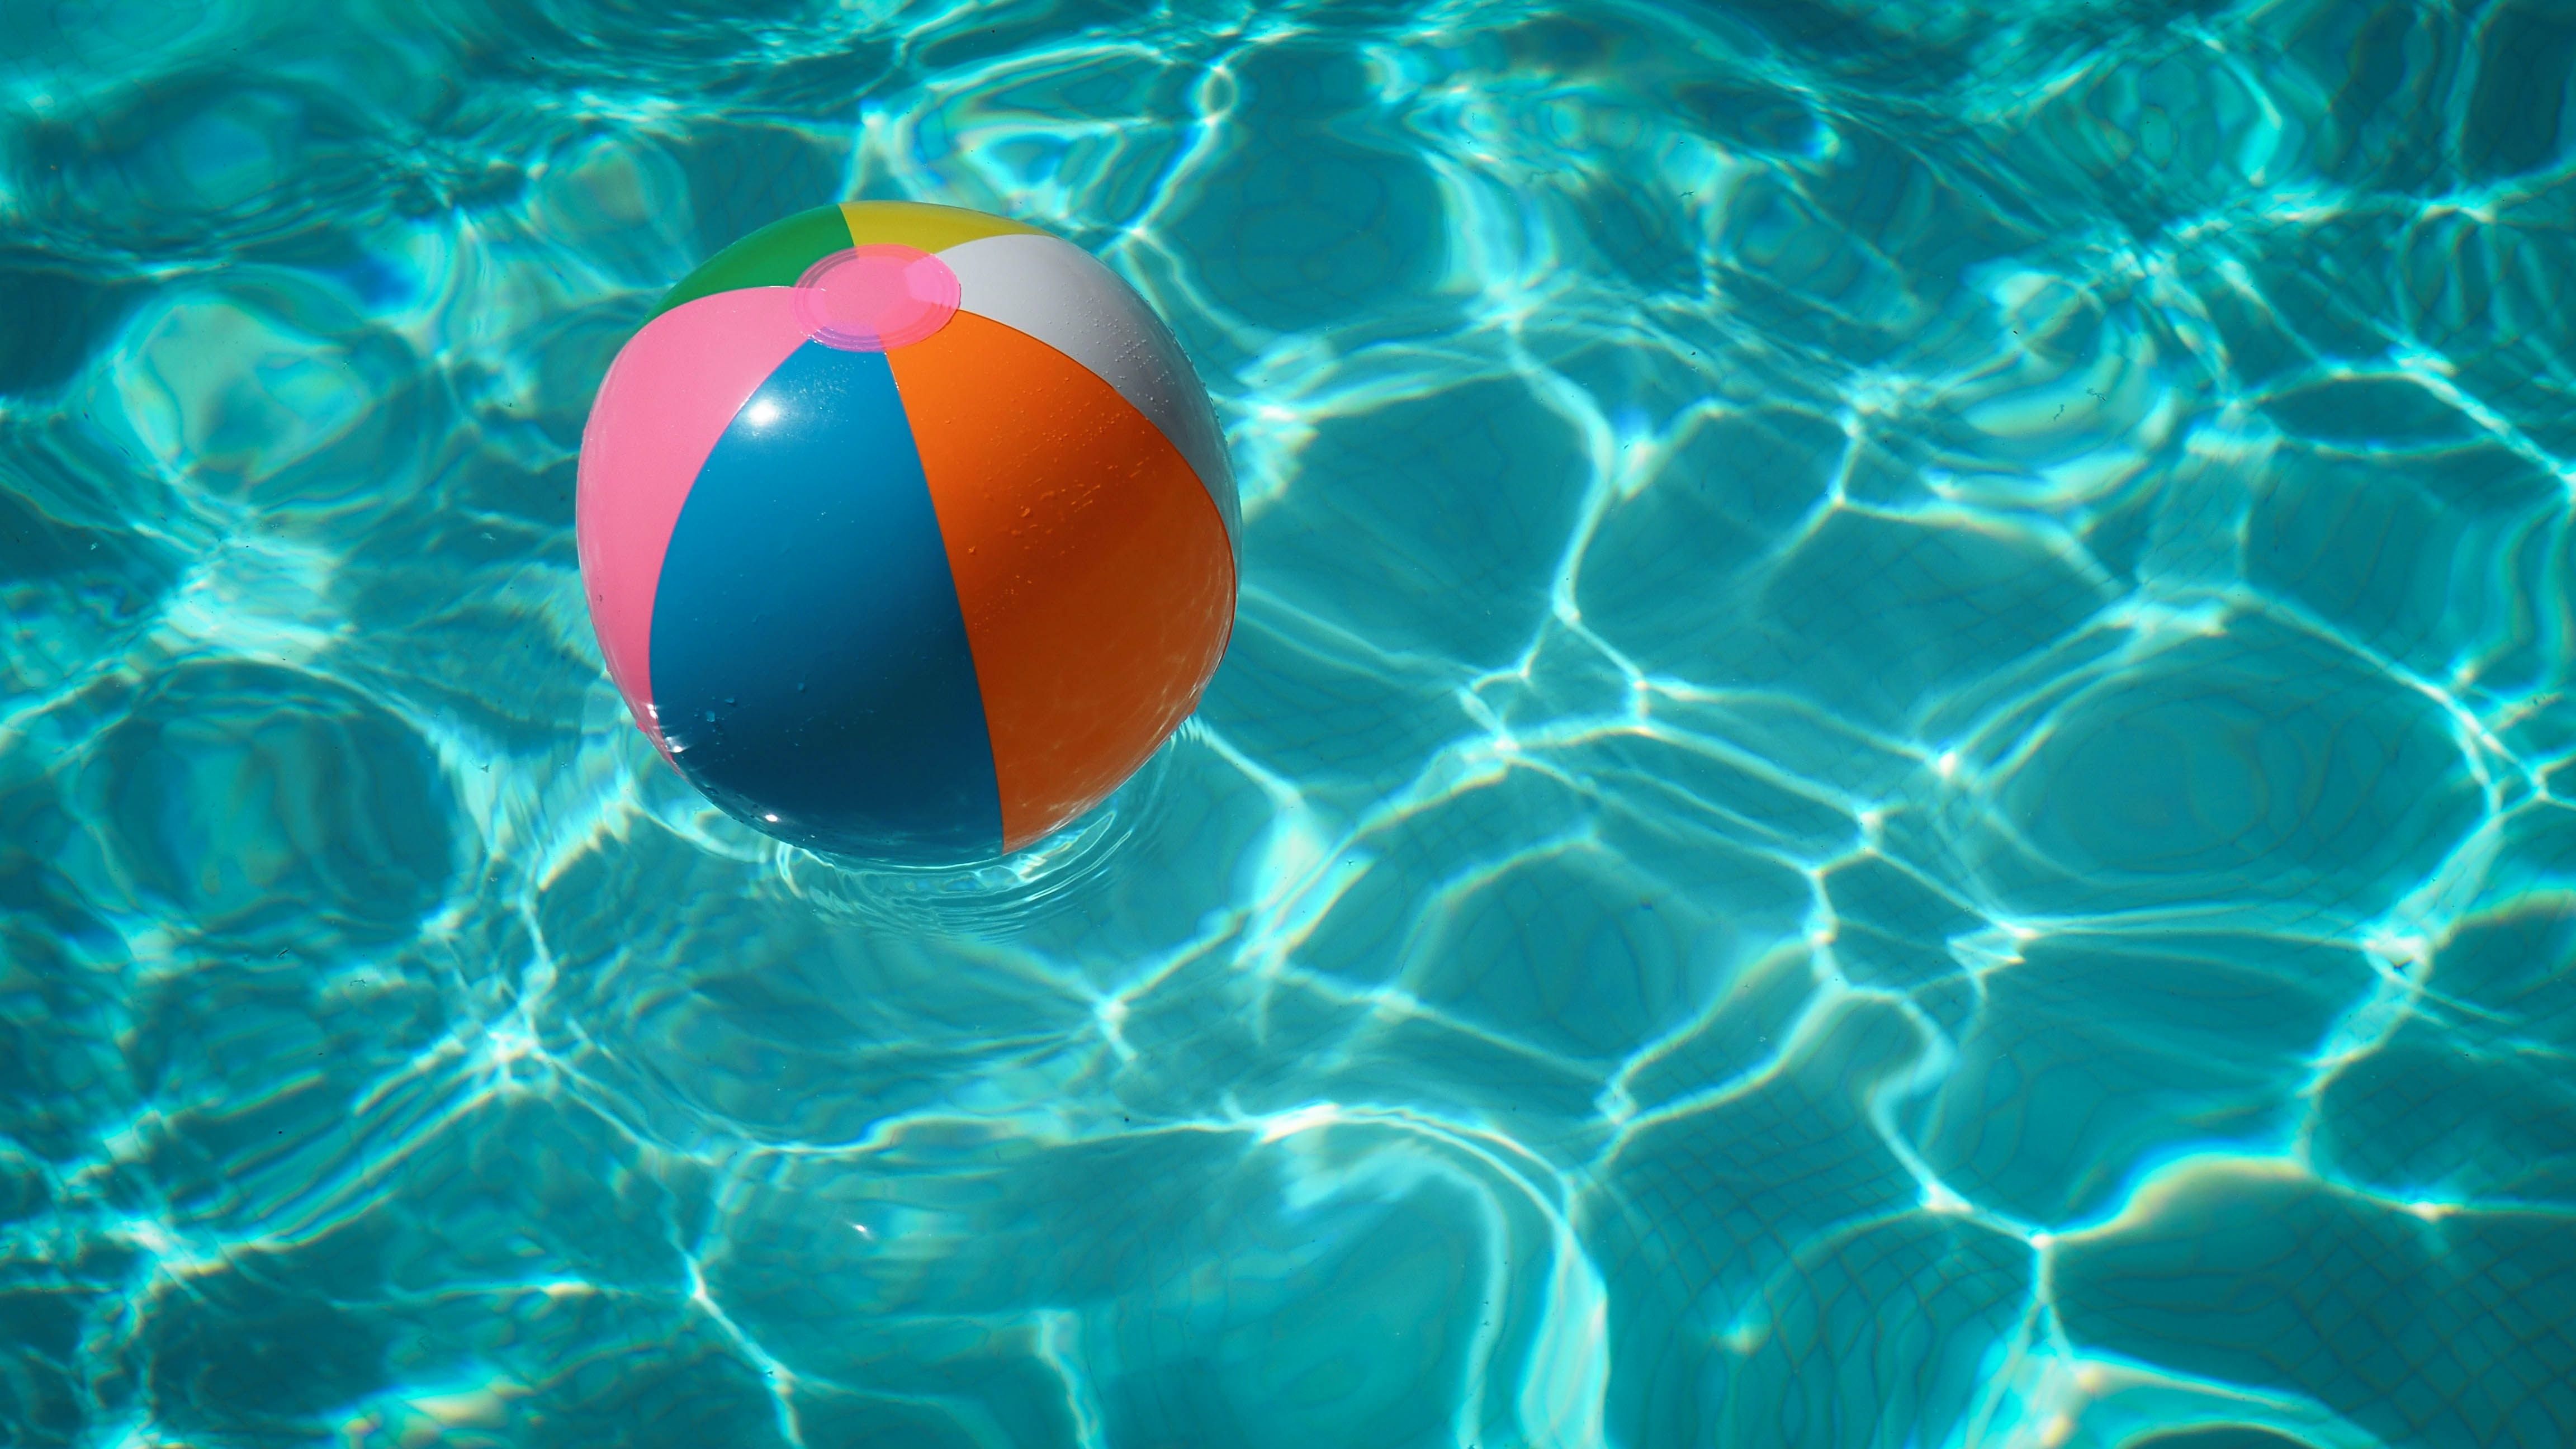 Ball in a pool